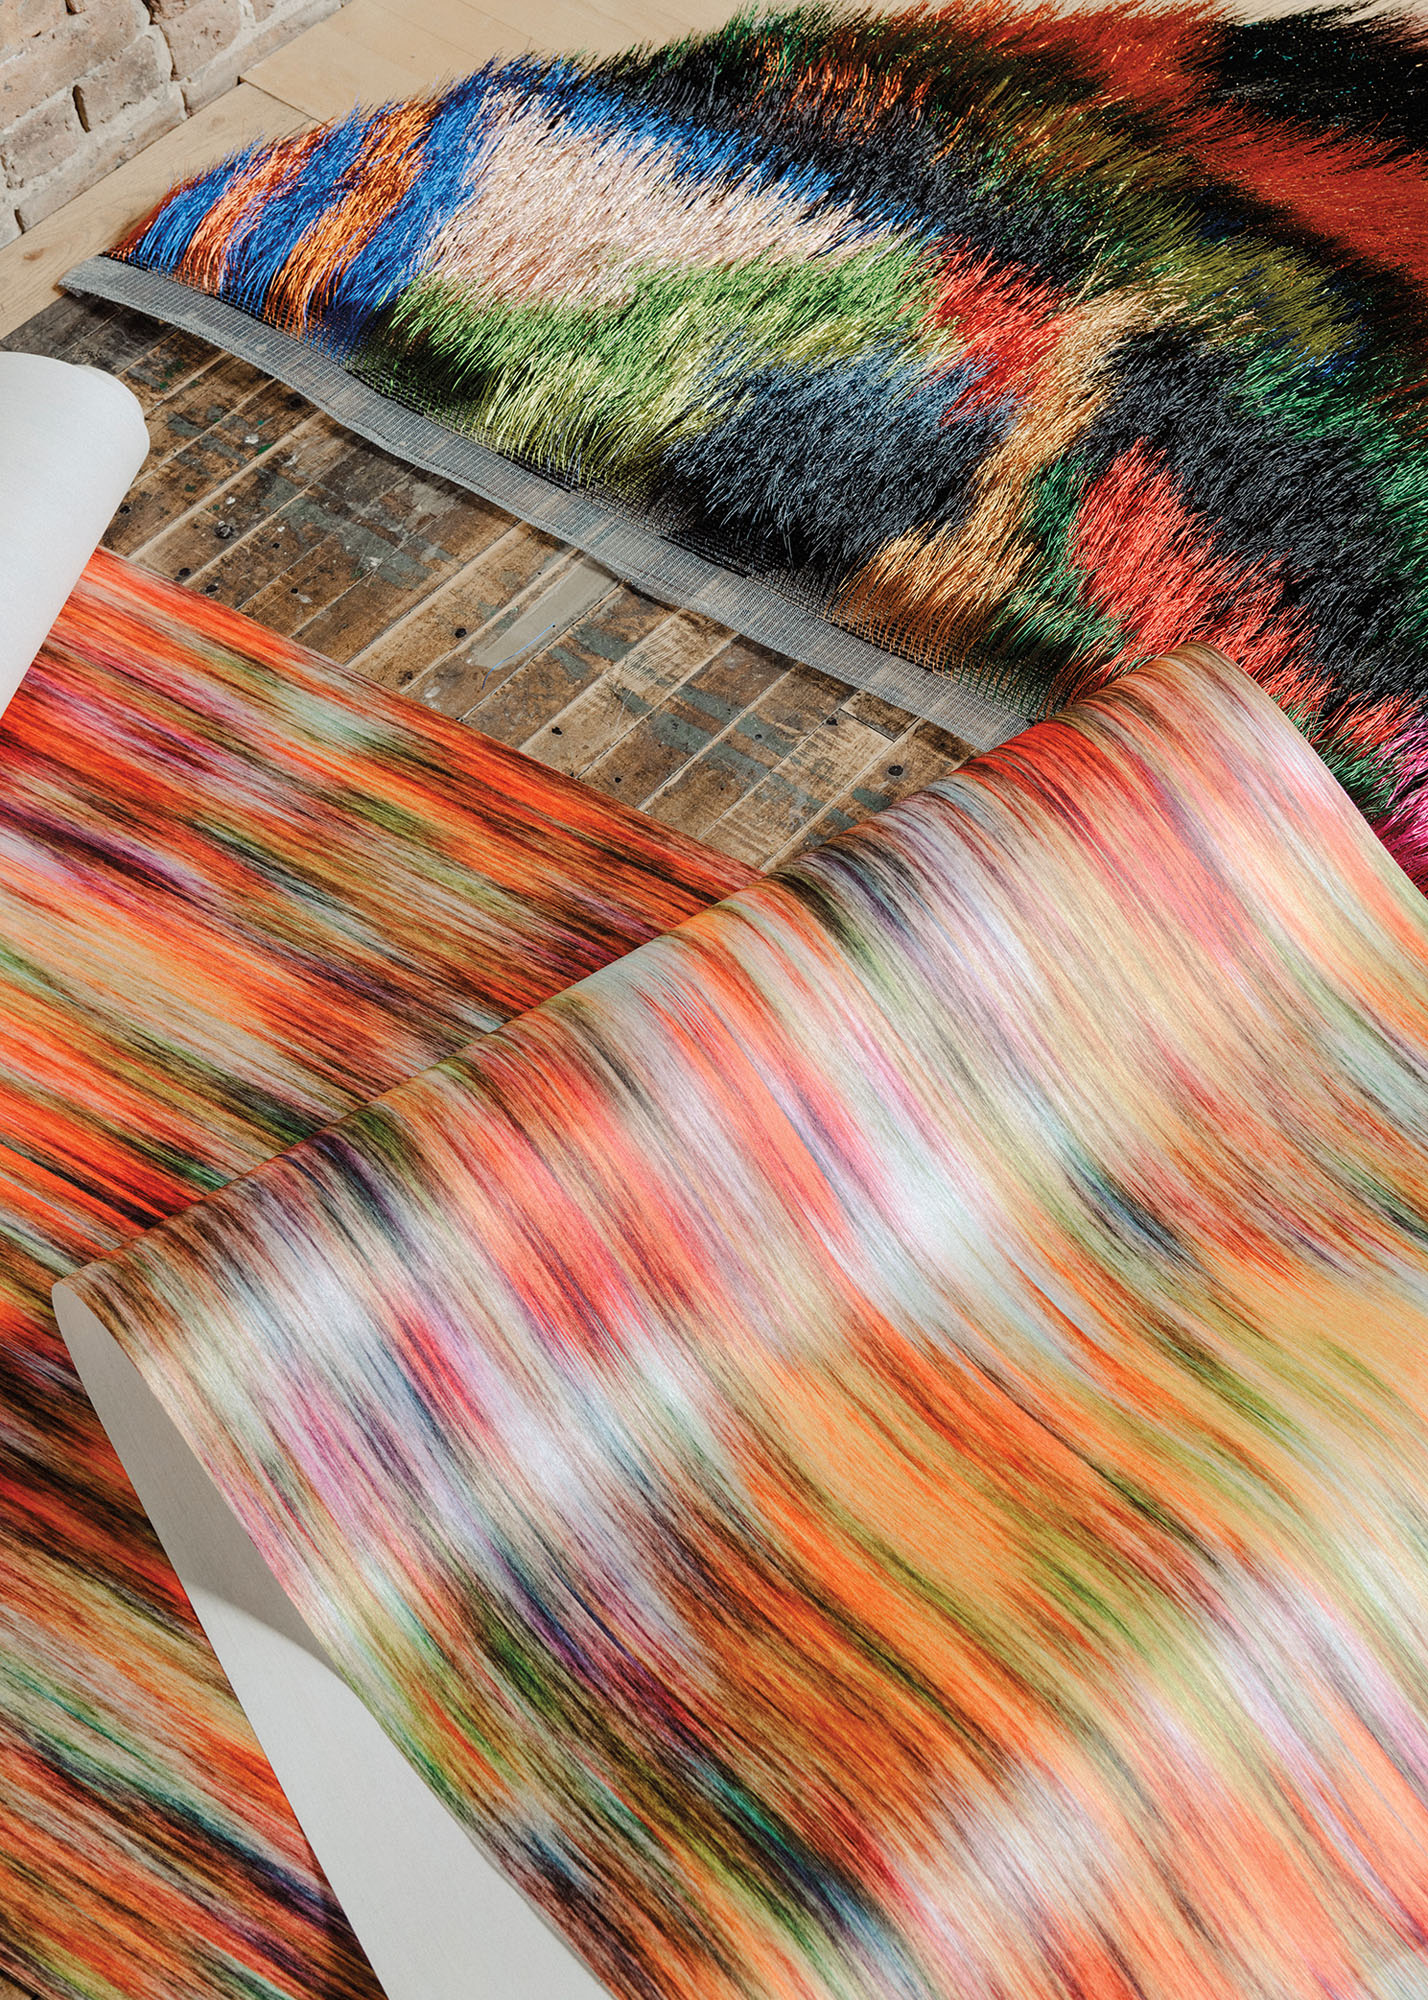 detail of a colorful fabric designed by Nick Cave